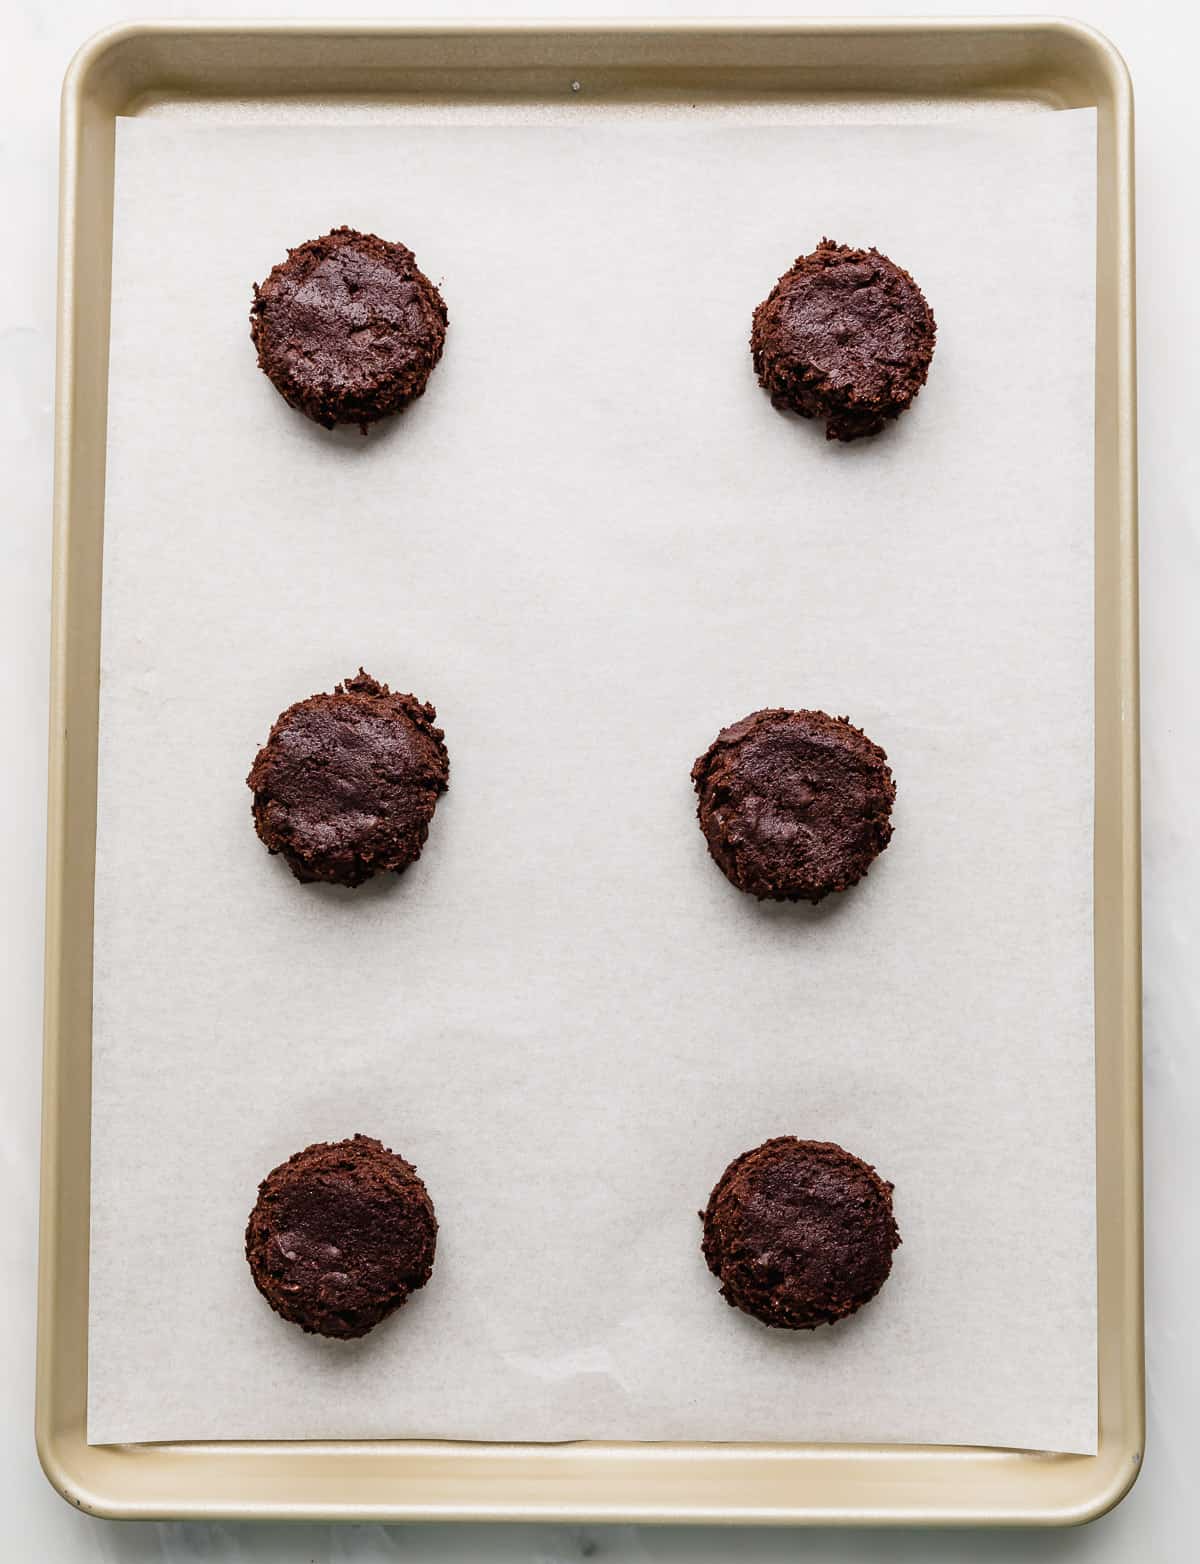 Six dark chocolate cookie dough balls on a white parchment lined baking sheet.